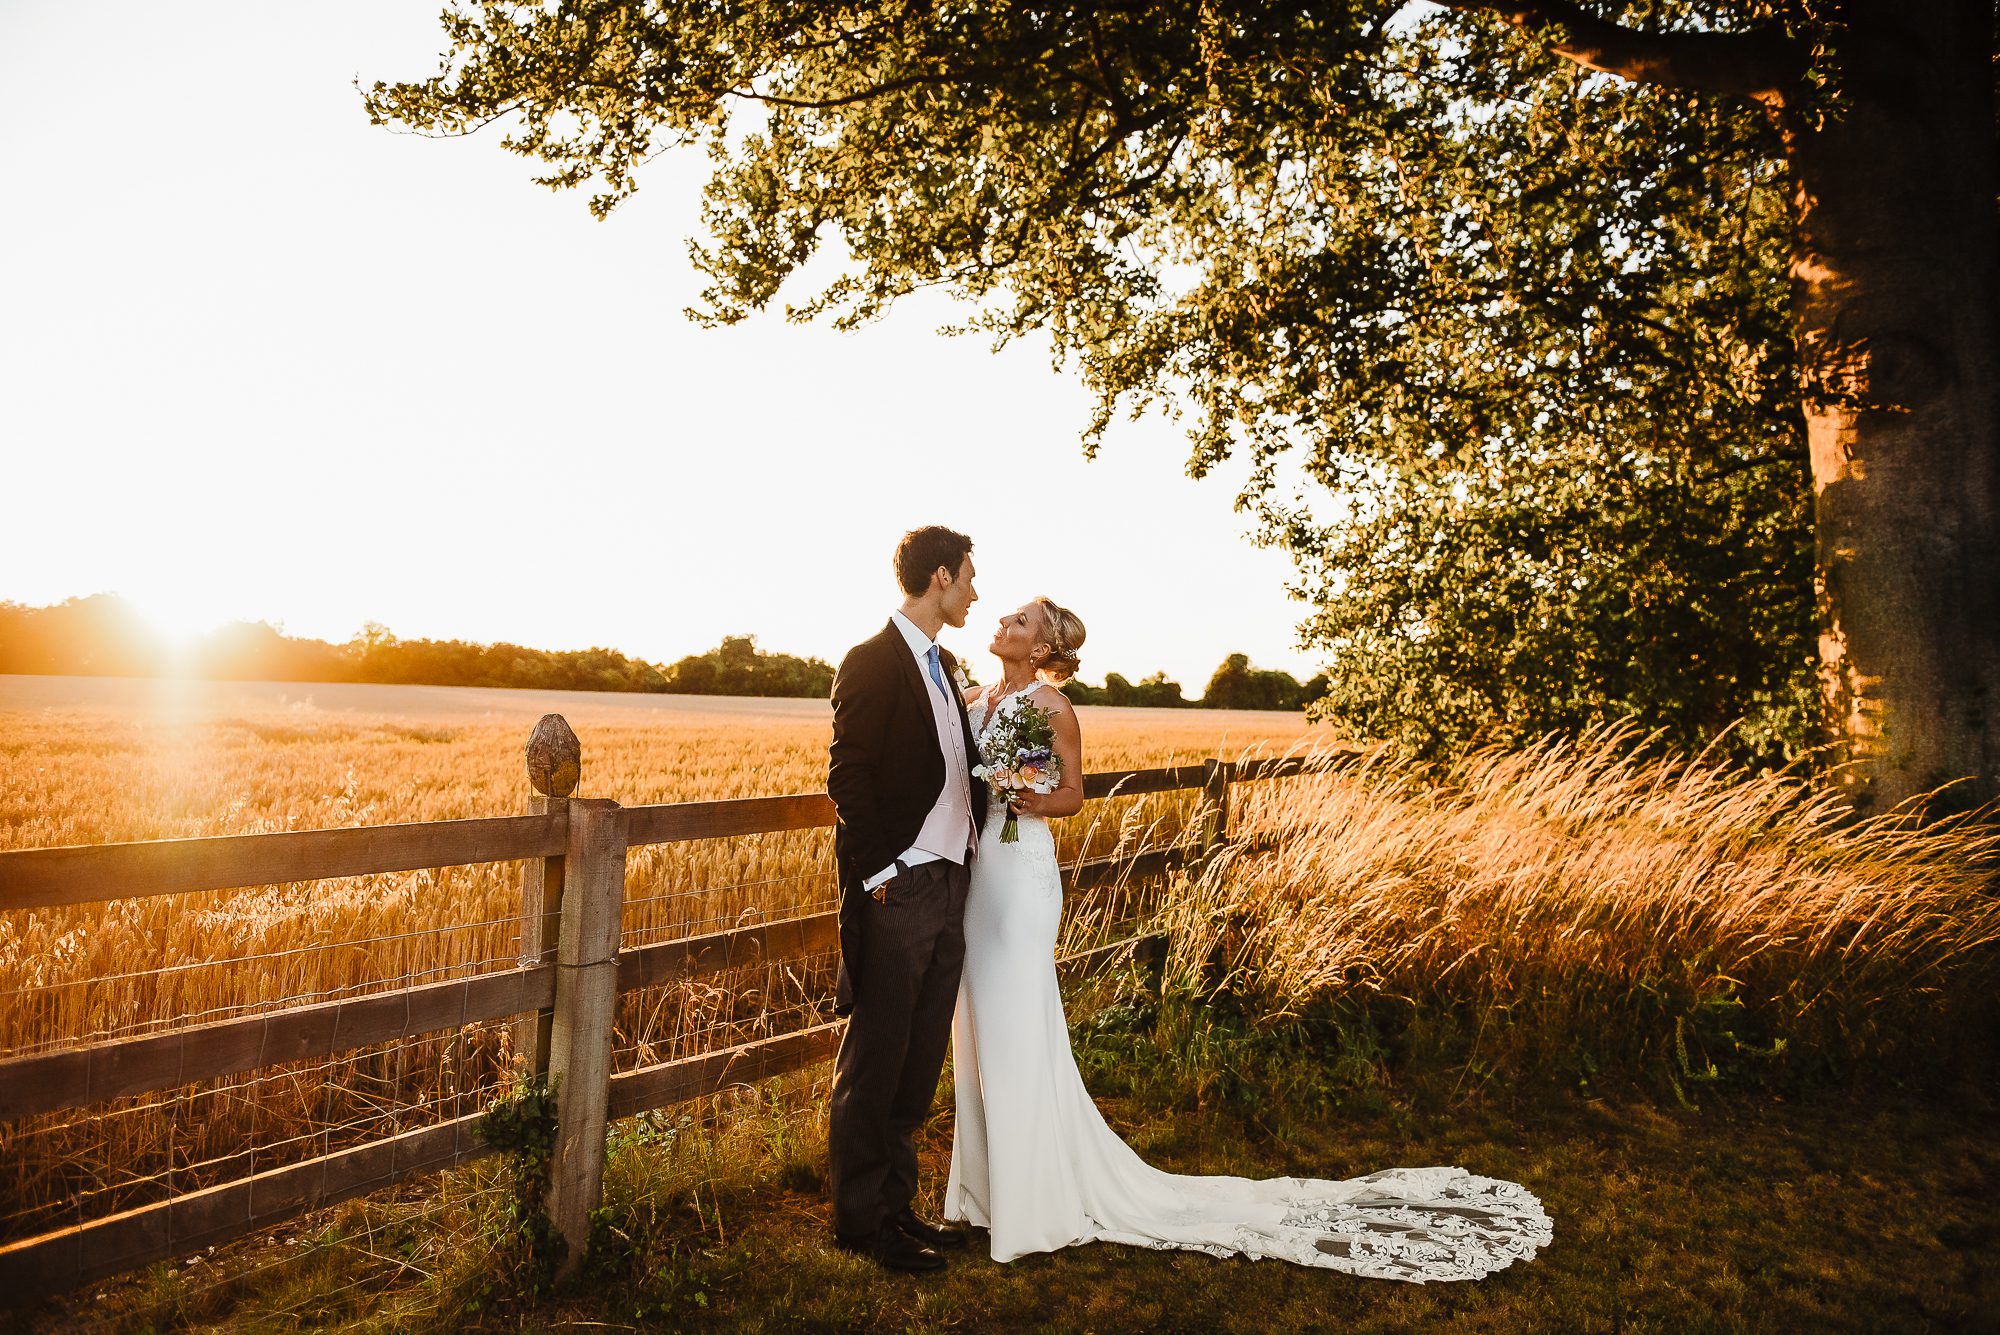 English countryside sunset bride and groom photography.